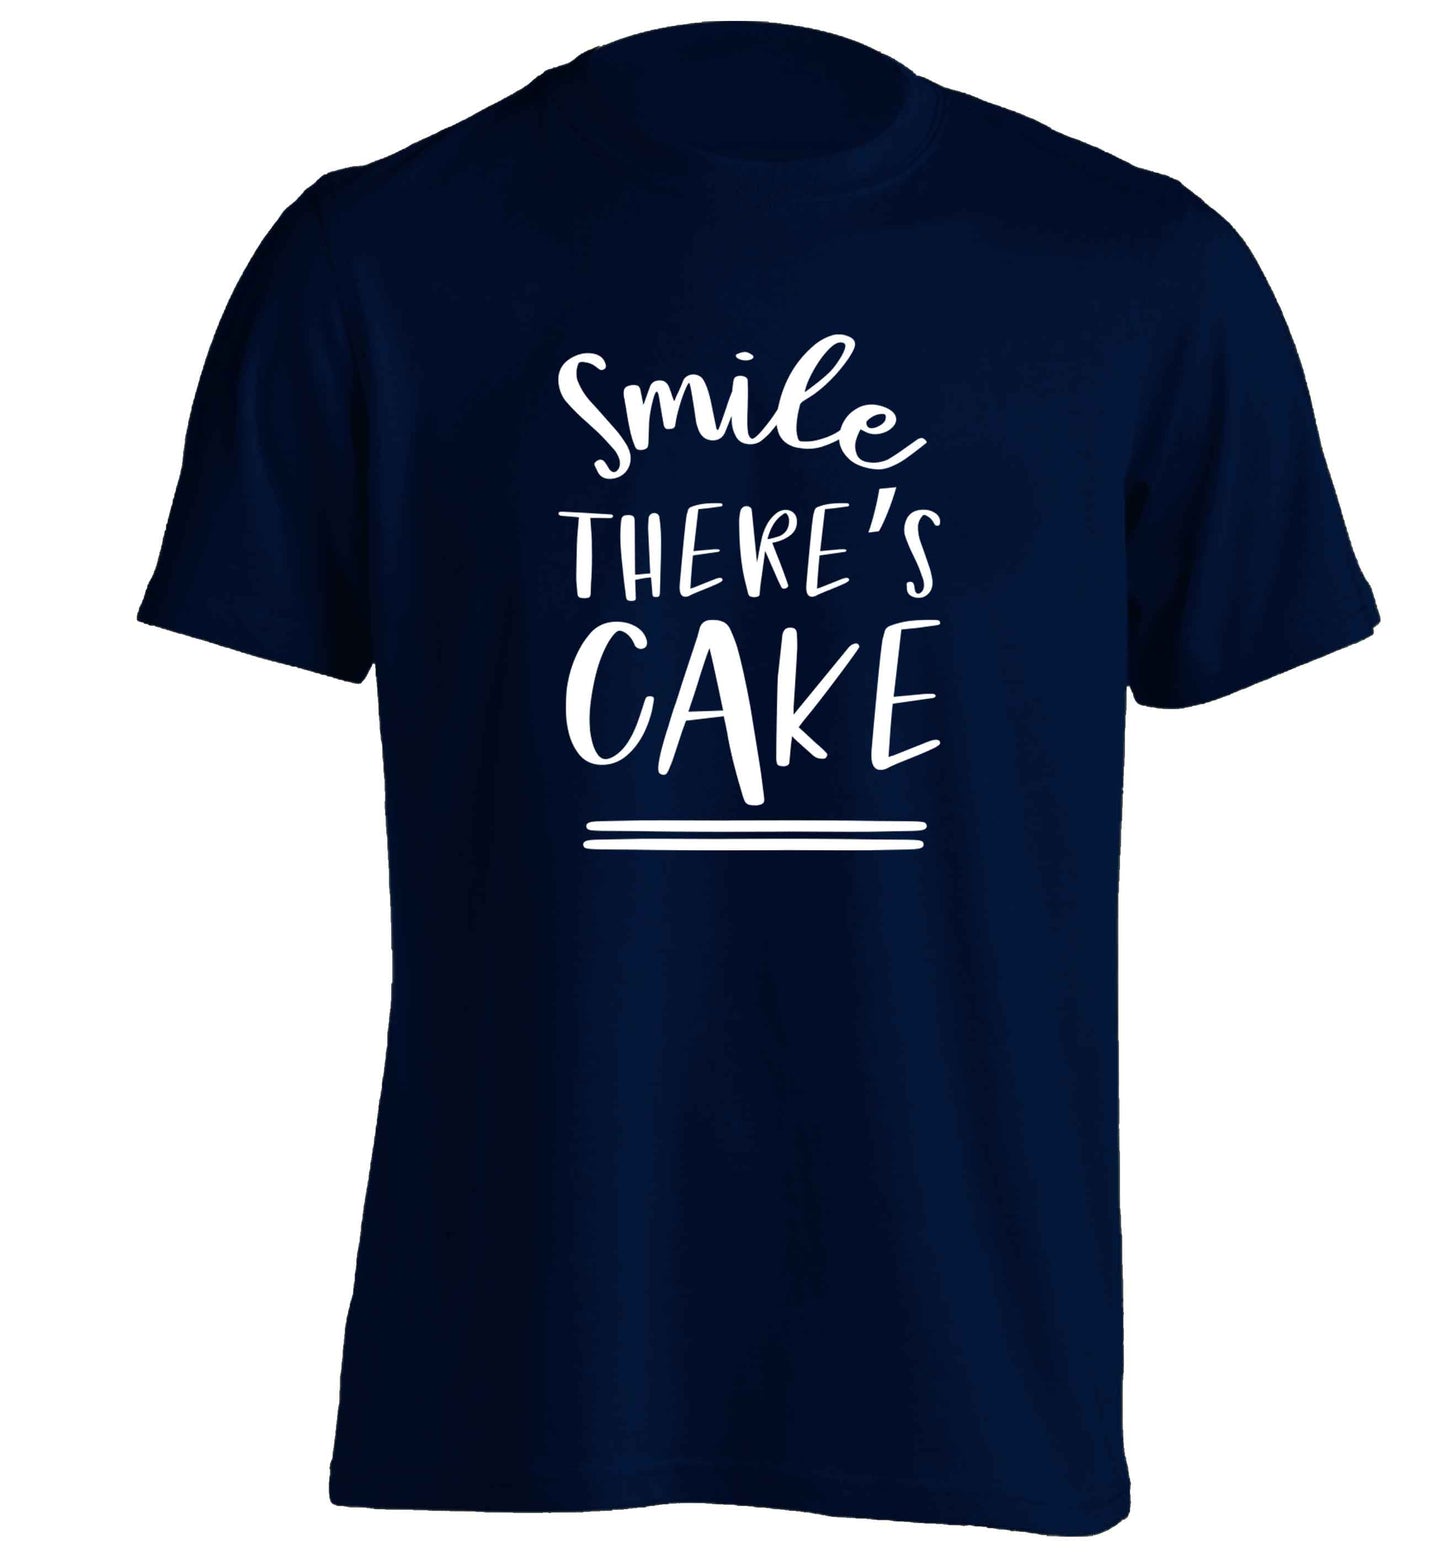 Smile there's cake adults unisex navy Tshirt 2XL